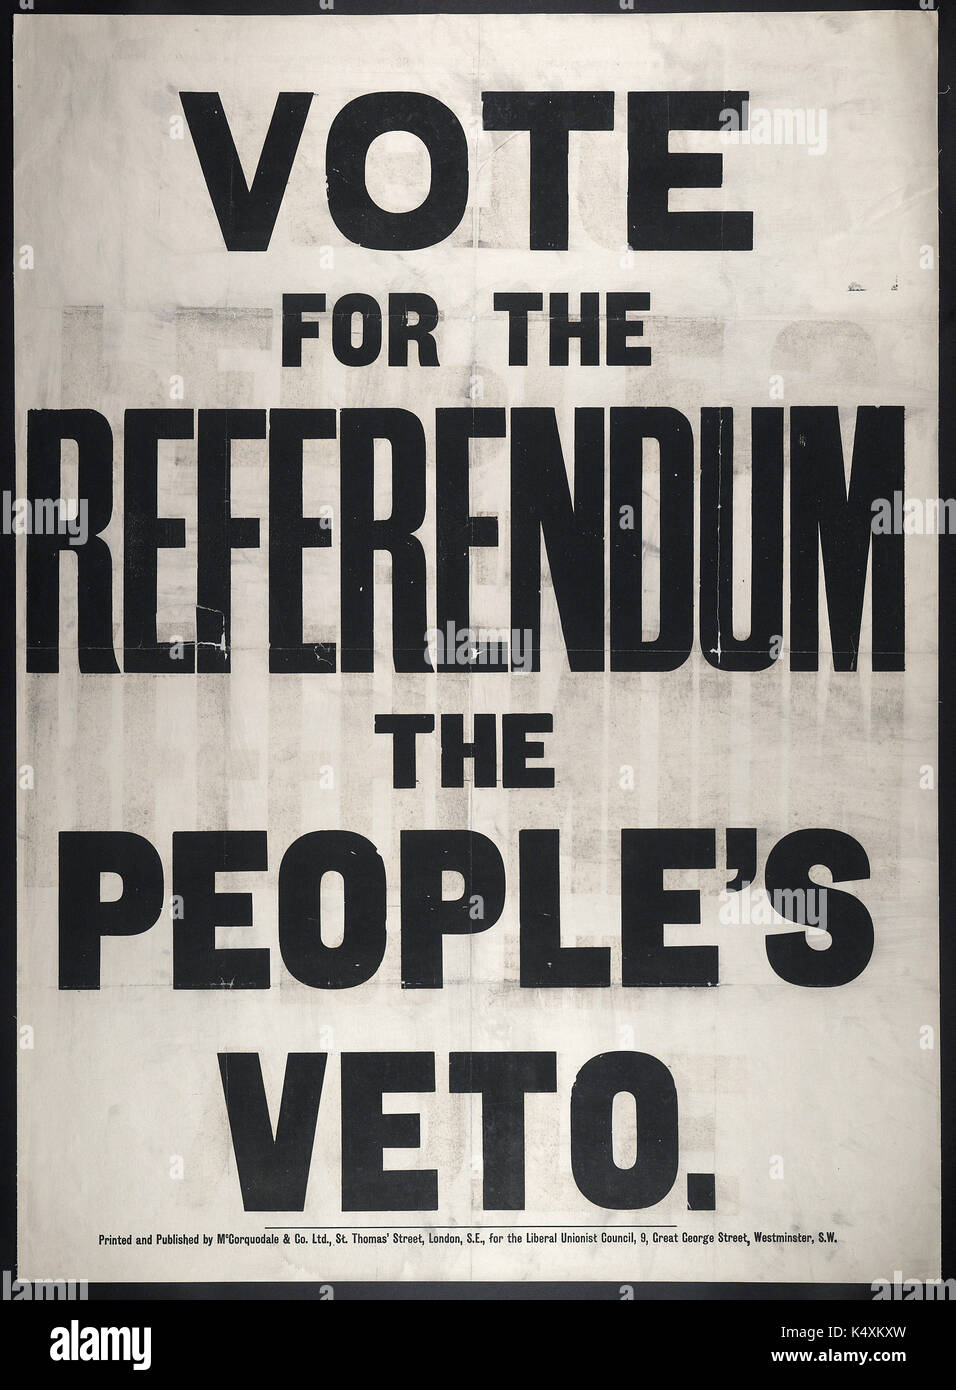 Vote for the Referendum, the People's Veto  - British Political Posters, c1905-c1910 Stock Photo